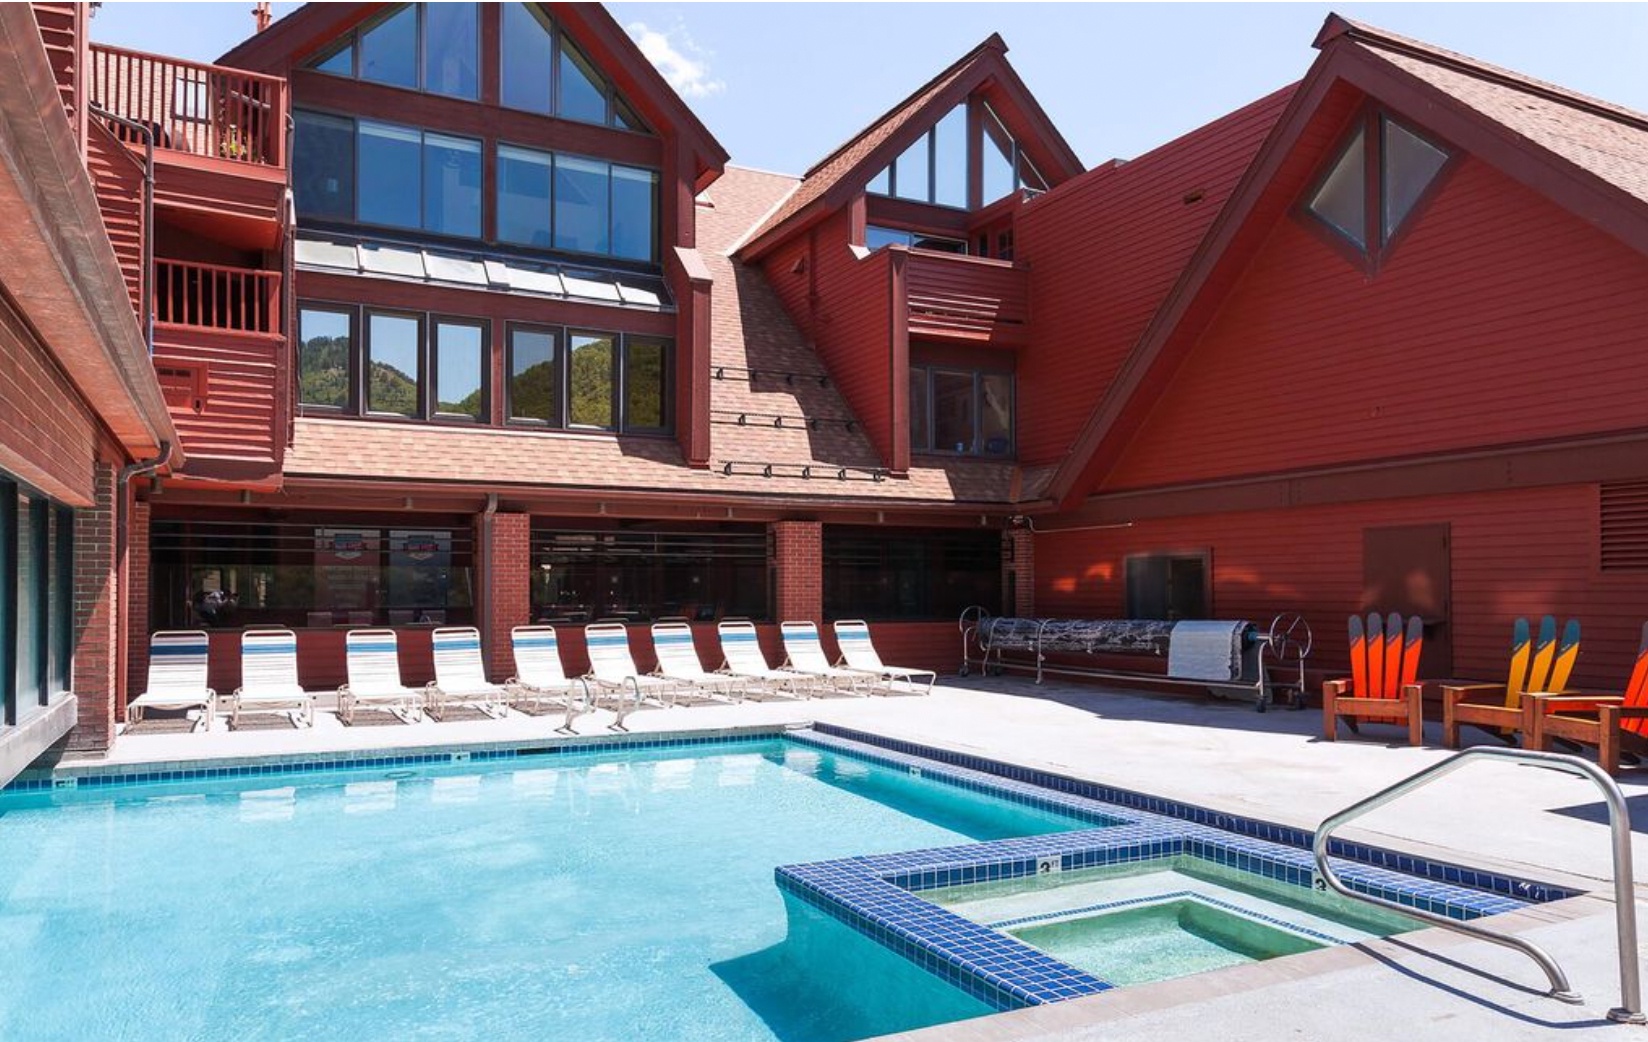 Park City Vacation Rentals, Studio Condo at The Lodge at Mountain Village - Heated pool for the resort guests